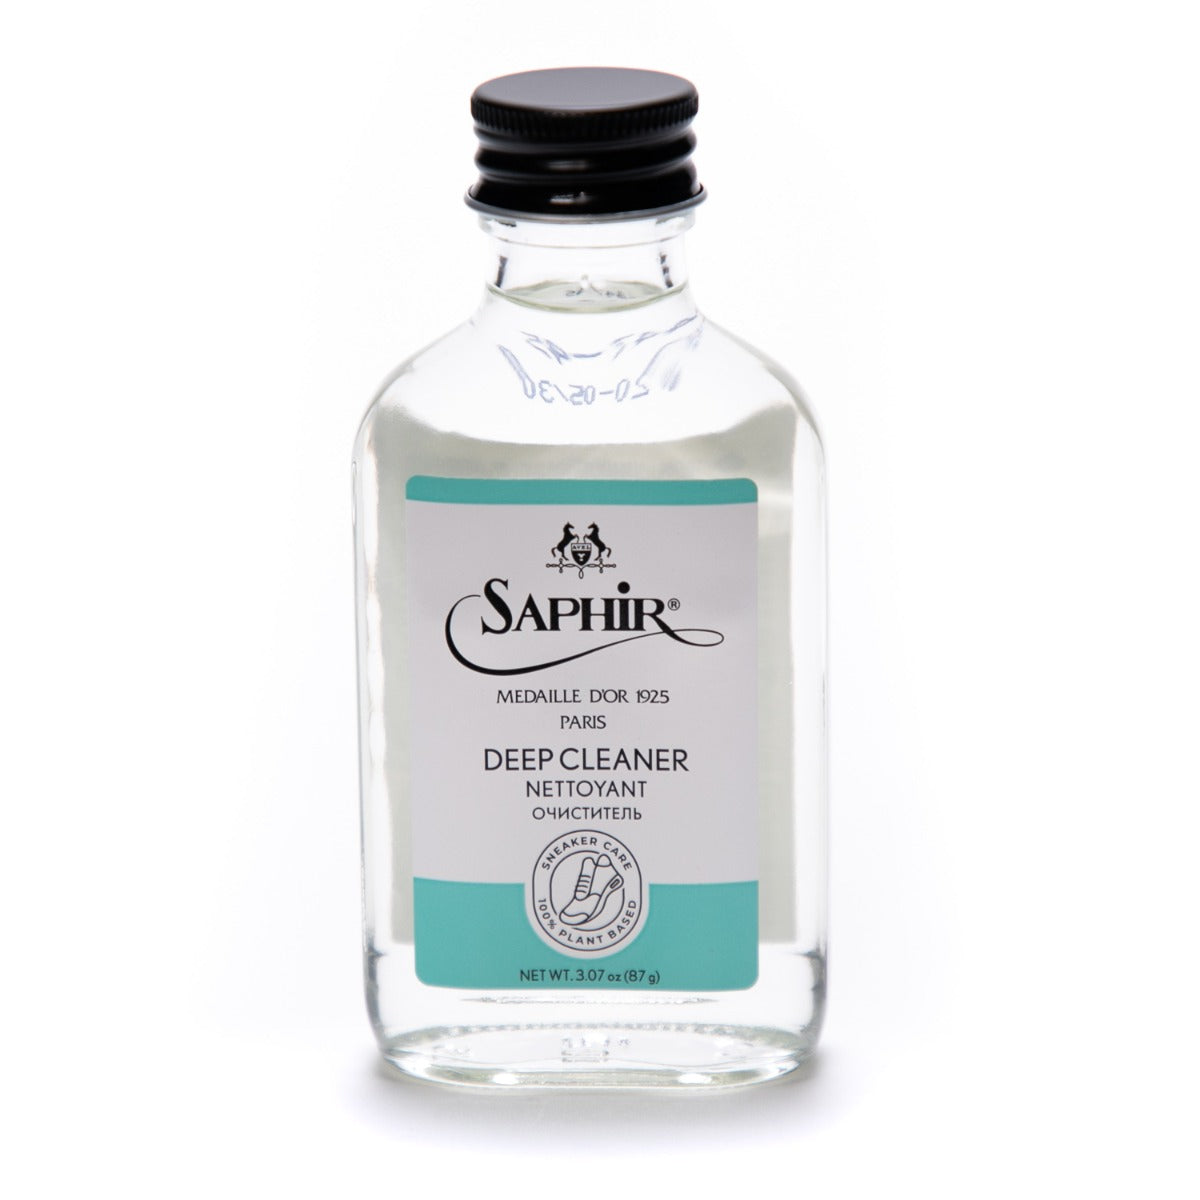 A bottle of Saphir Sneaker Deep Cleaner - 100ml by KirbyAllison.com on a white background.